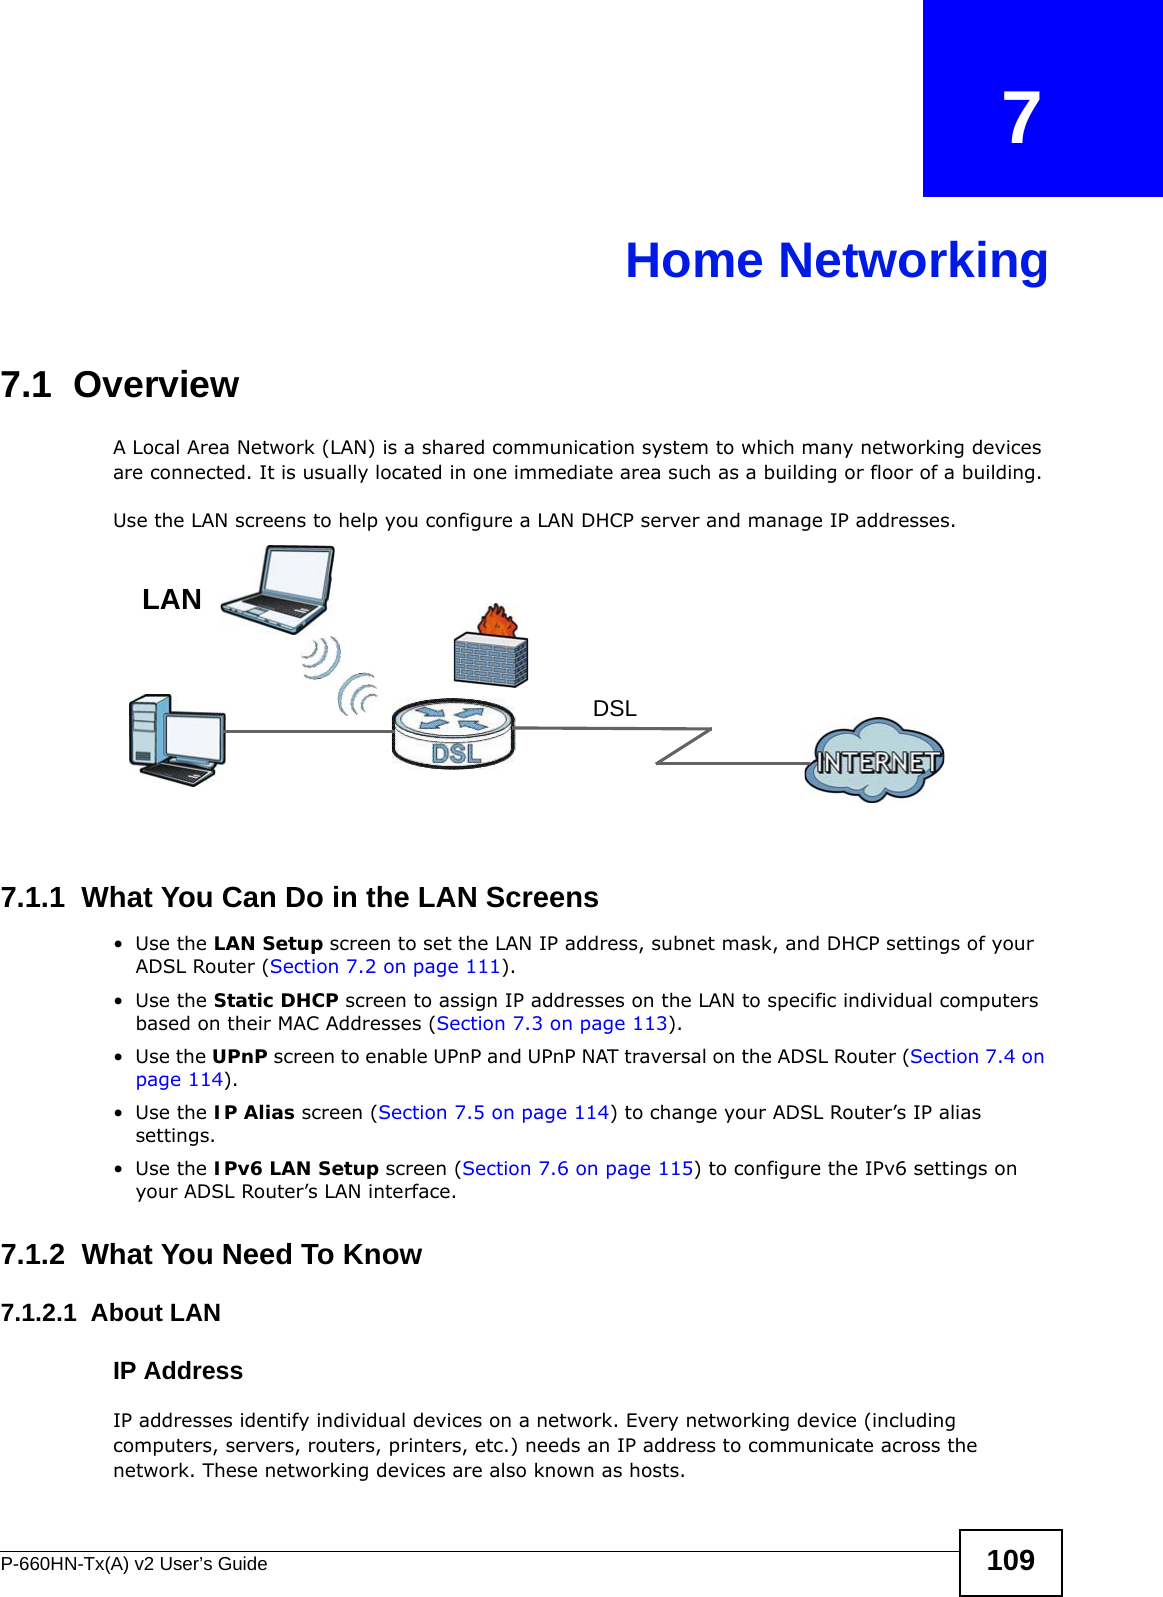 P-660HN-Tx(A) v2 User’s Guide 109CHAPTER   7Home Networking7.1  OverviewA Local Area Network (LAN) is a shared communication system to which many networking devices are connected. It is usually located in one immediate area such as a building or floor of a building.Use the LAN screens to help you configure a LAN DHCP server and manage IP addresses.7.1.1  What You Can Do in the LAN Screens•Use the LAN Setup screen to set the LAN IP address, subnet mask, and DHCP settings of your ADSL Router (Section 7.2 on page 111).•Use the Static DHCP screen to assign IP addresses on the LAN to specific individual computers based on their MAC Addresses (Section 7.3 on page 113). •Use the UPnP screen to enable UPnP and UPnP NAT traversal on the ADSL Router (Section 7.4 on page 114).•Use the IP Alias screen (Section 7.5 on page 114) to change your ADSL Router’s IP alias settings.•Use the IPv6 LAN Setup screen (Section 7.6 on page 115) to configure the IPv6 settings on your ADSL Router’s LAN interface.7.1.2  What You Need To Know 7.1.2.1  About LANIP AddressIP addresses identify individual devices on a network. Every networking device (including computers, servers, routers, printers, etc.) needs an IP address to communicate across the network. These networking devices are also known as hosts.DSLLAN